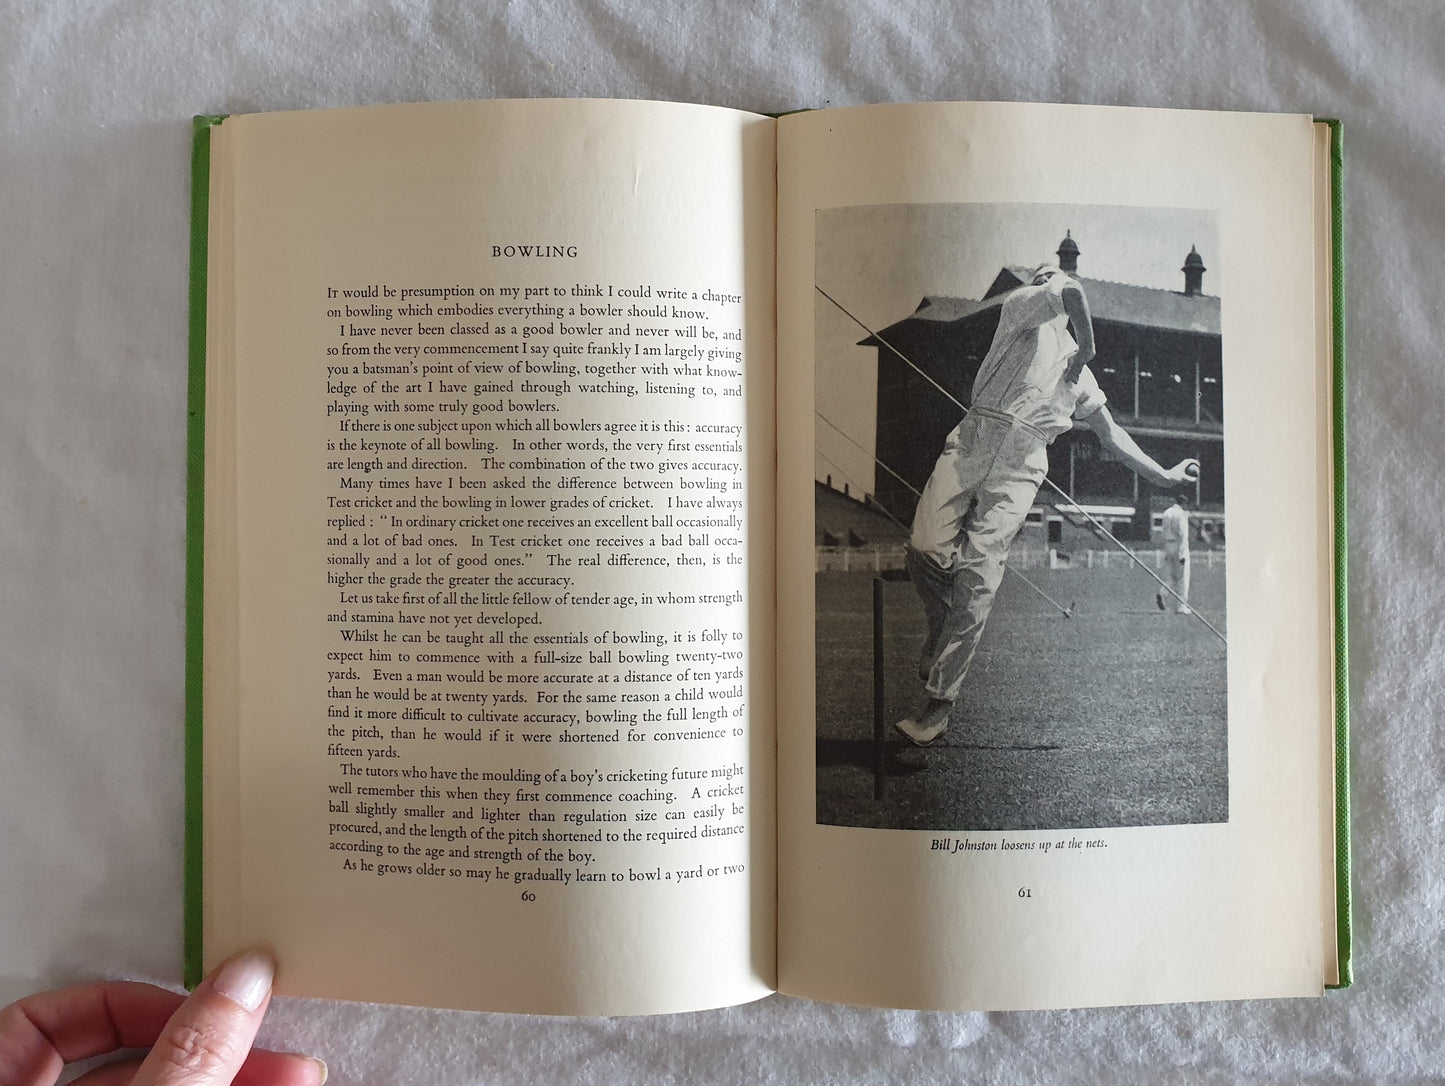 How To Play Cricket by Don Bradman